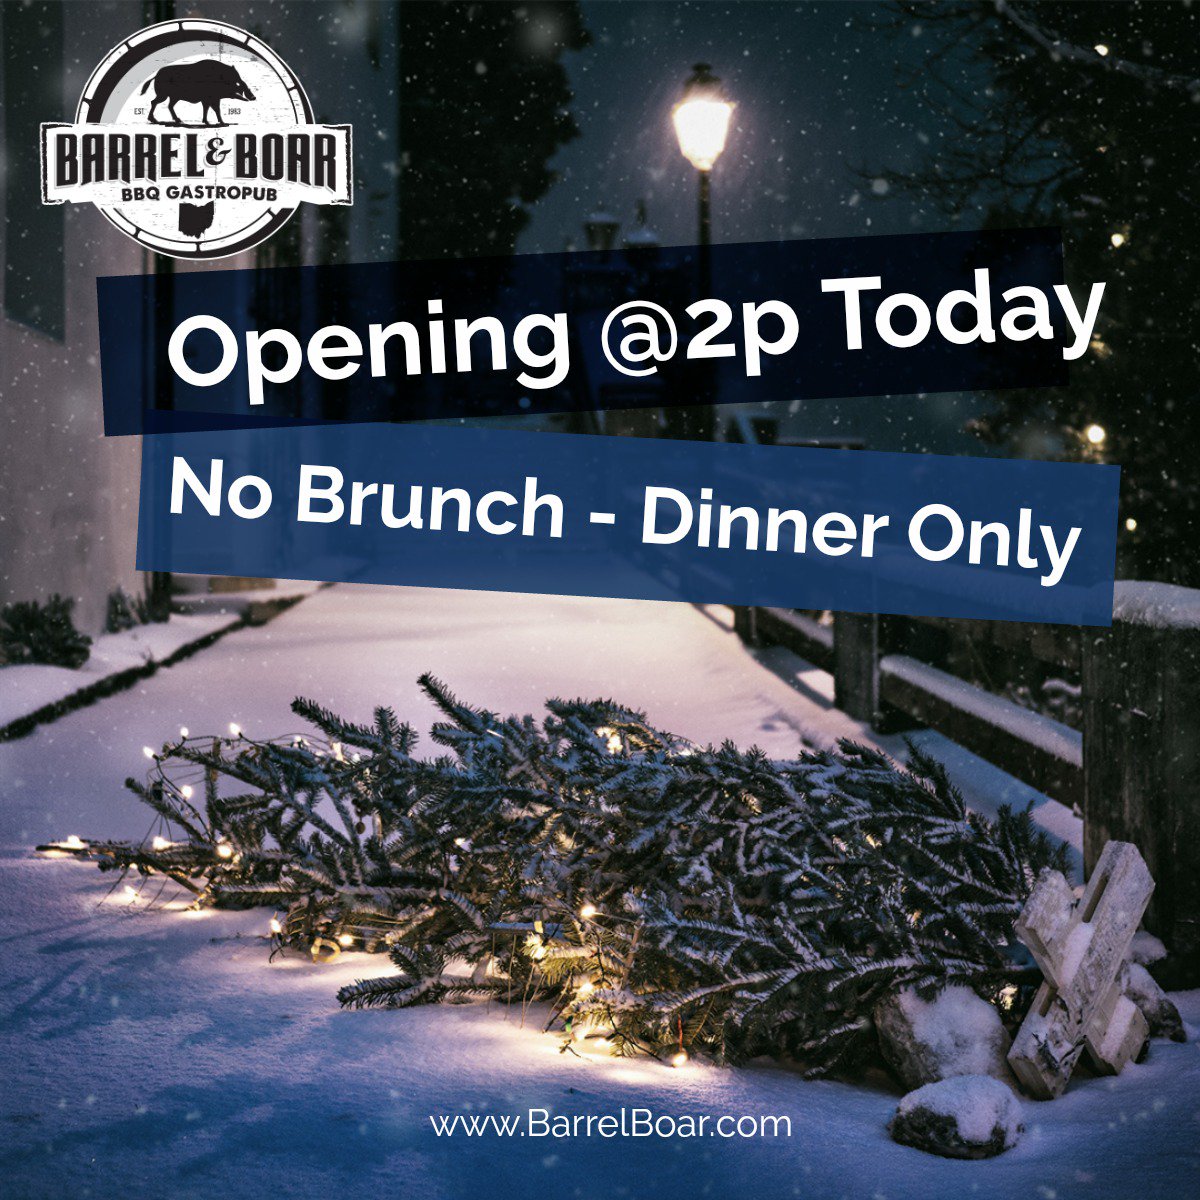 Due to the storm we have adjusted hours for Saturday, 1-13-18, and will not be serving Brunch on Saturday. #creeksidegahanna #gahanna #bbqsuccess  BarrelBoar.com